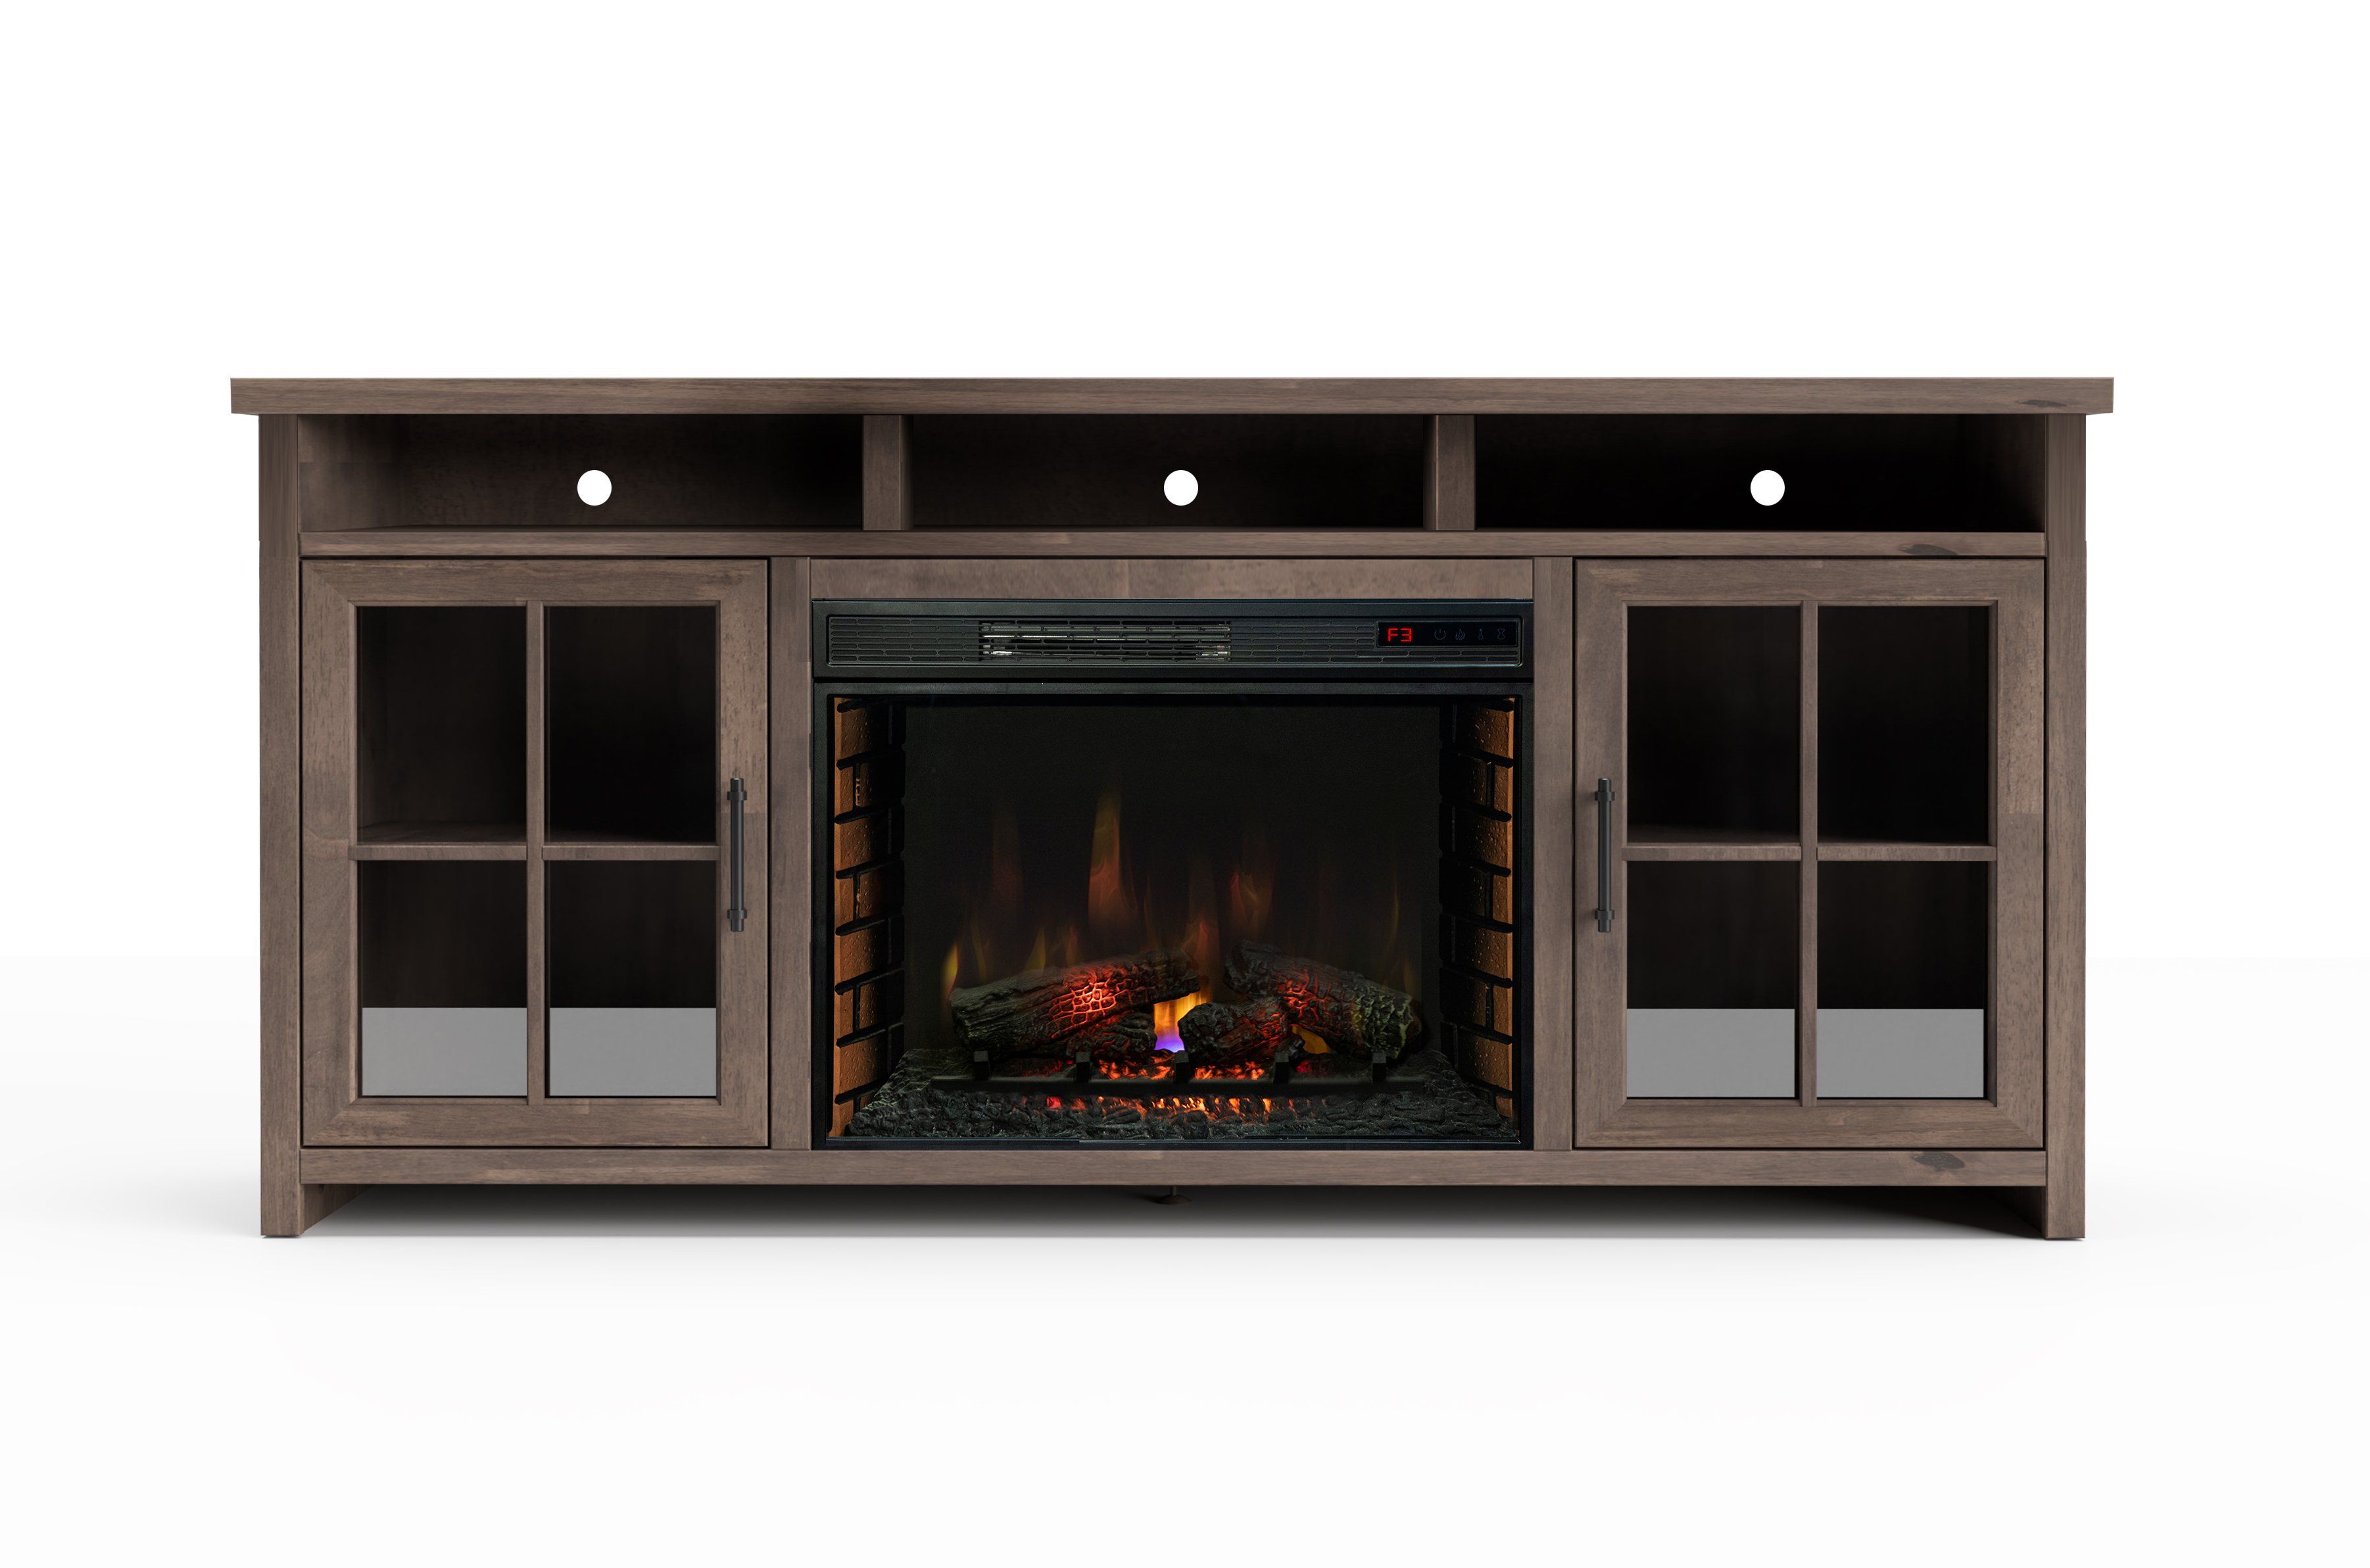 Spencer Fireplace Console